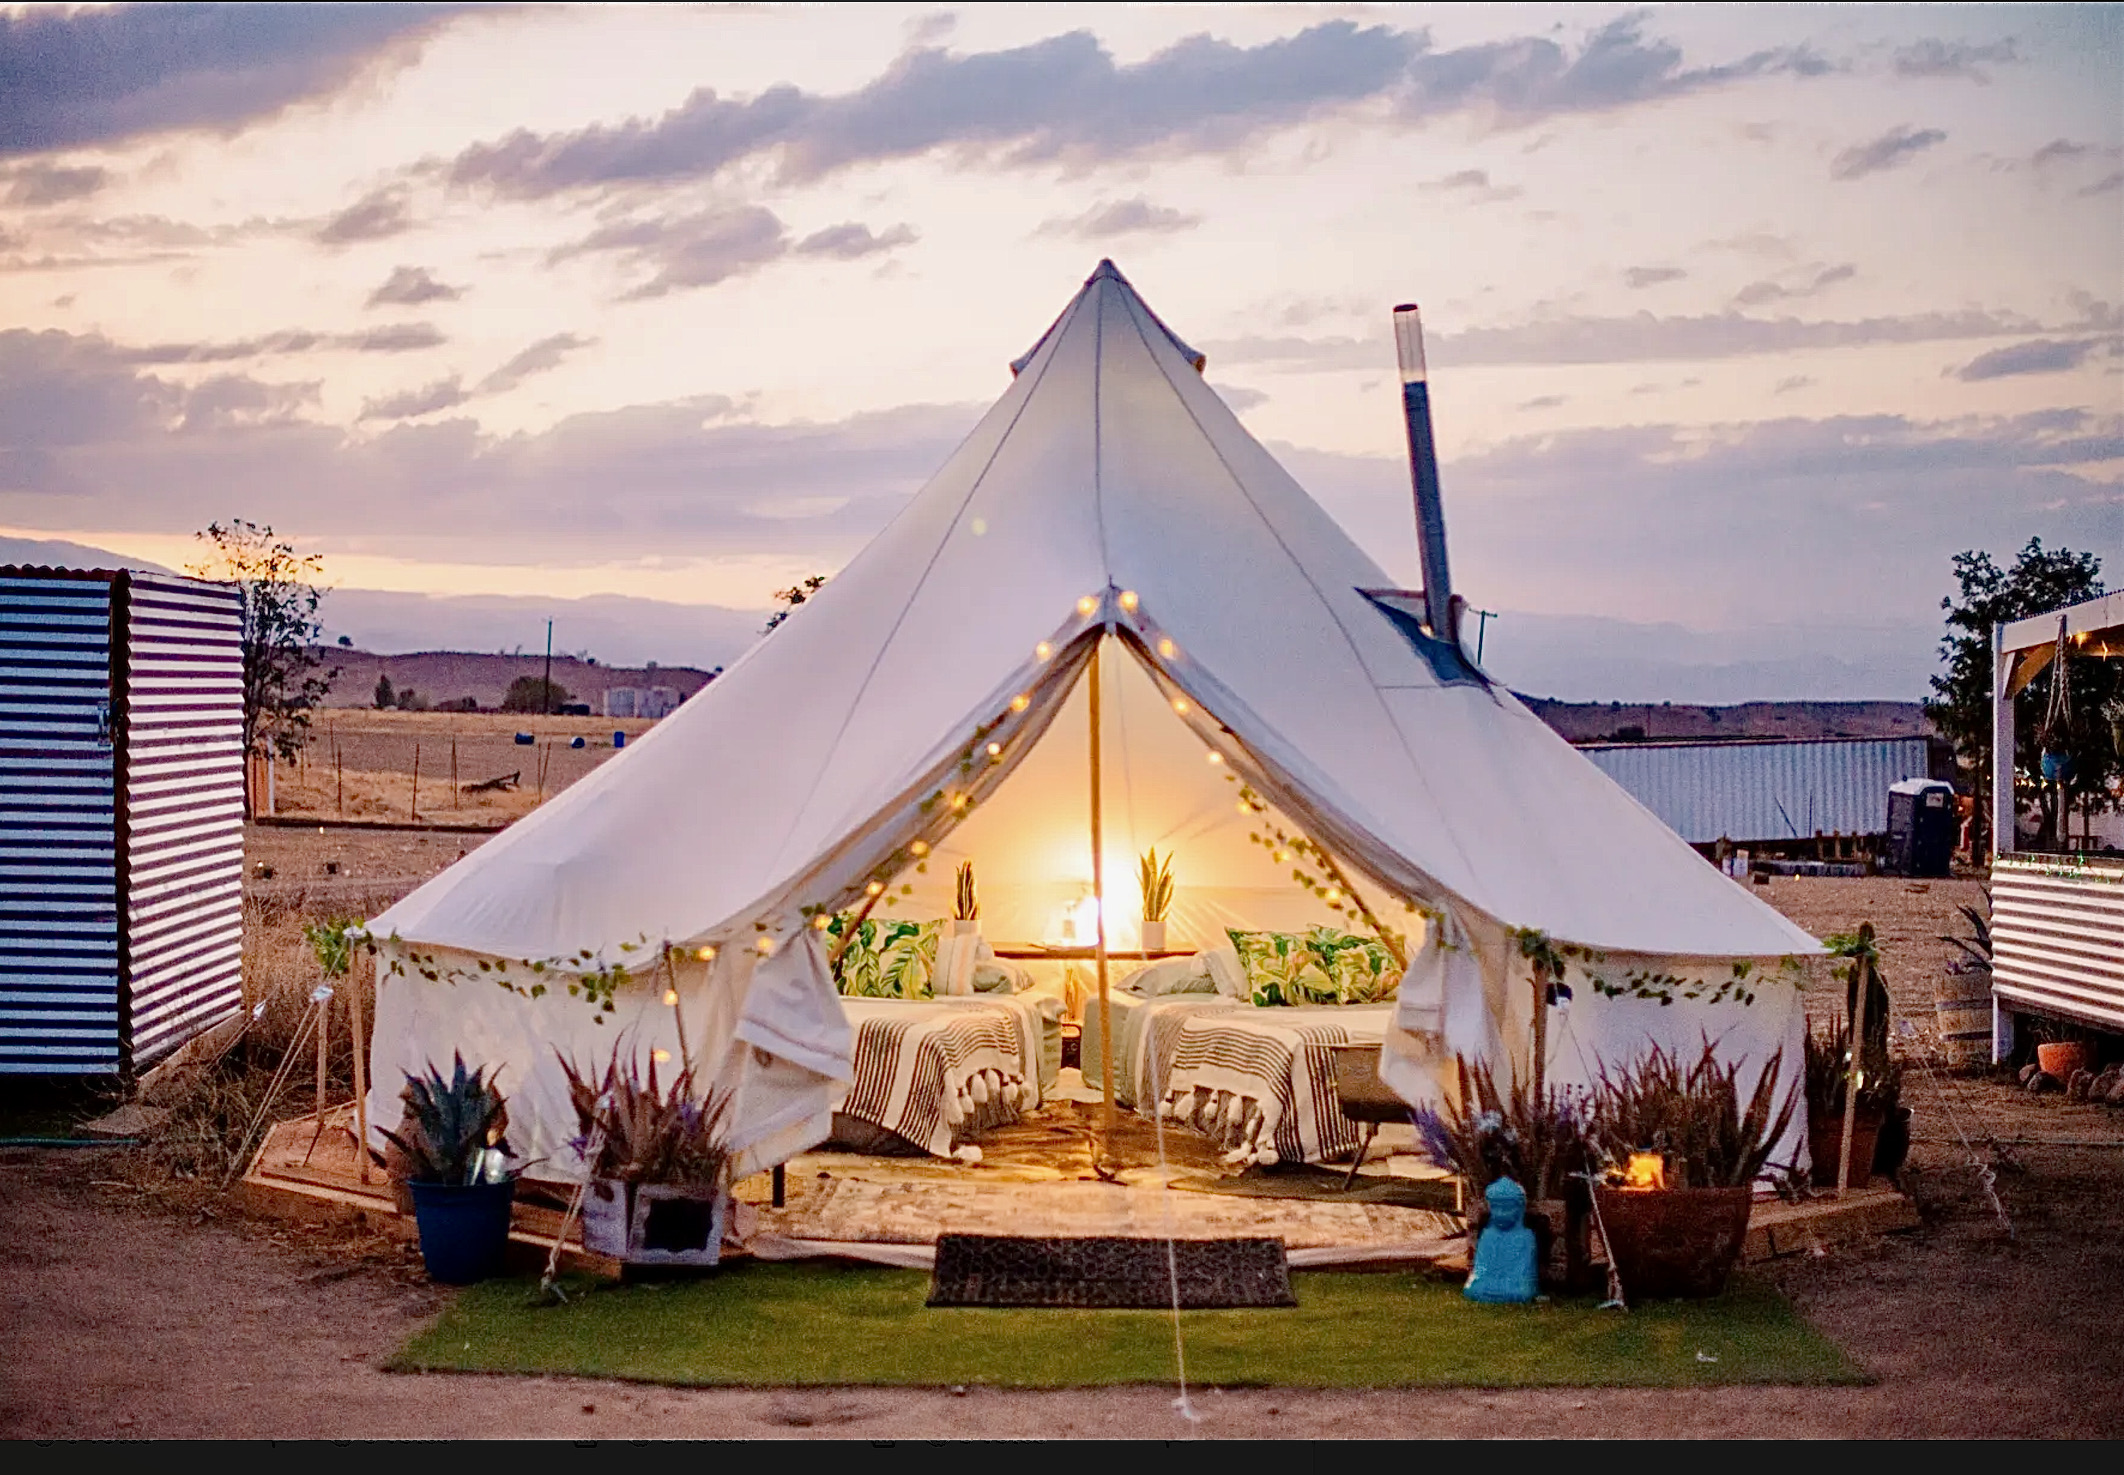 Exterior view of a white glamping tent set up in the desert landscape.